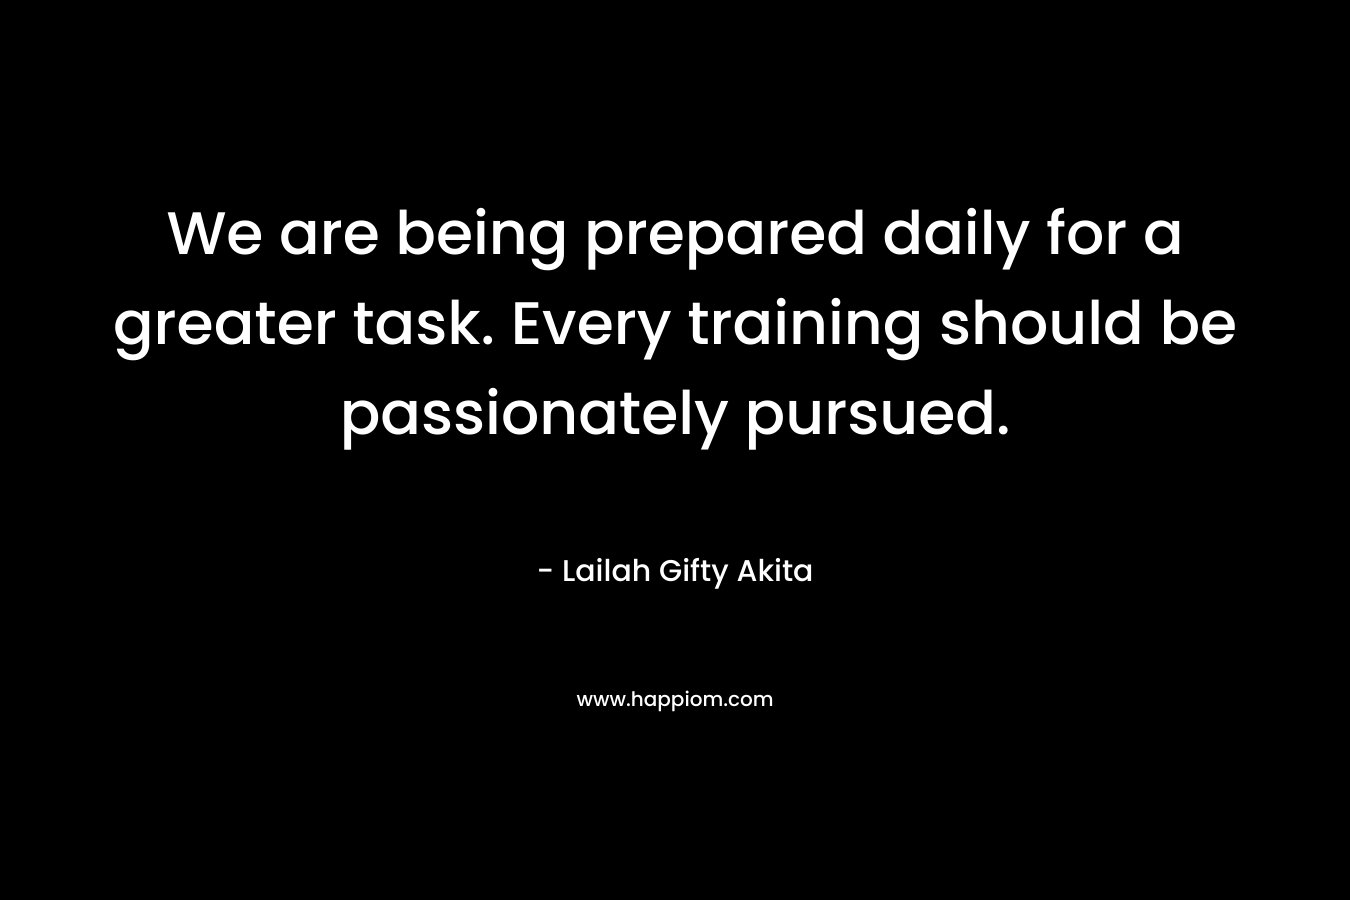 We are being prepared daily for a greater task. Every training should be passionately pursued.